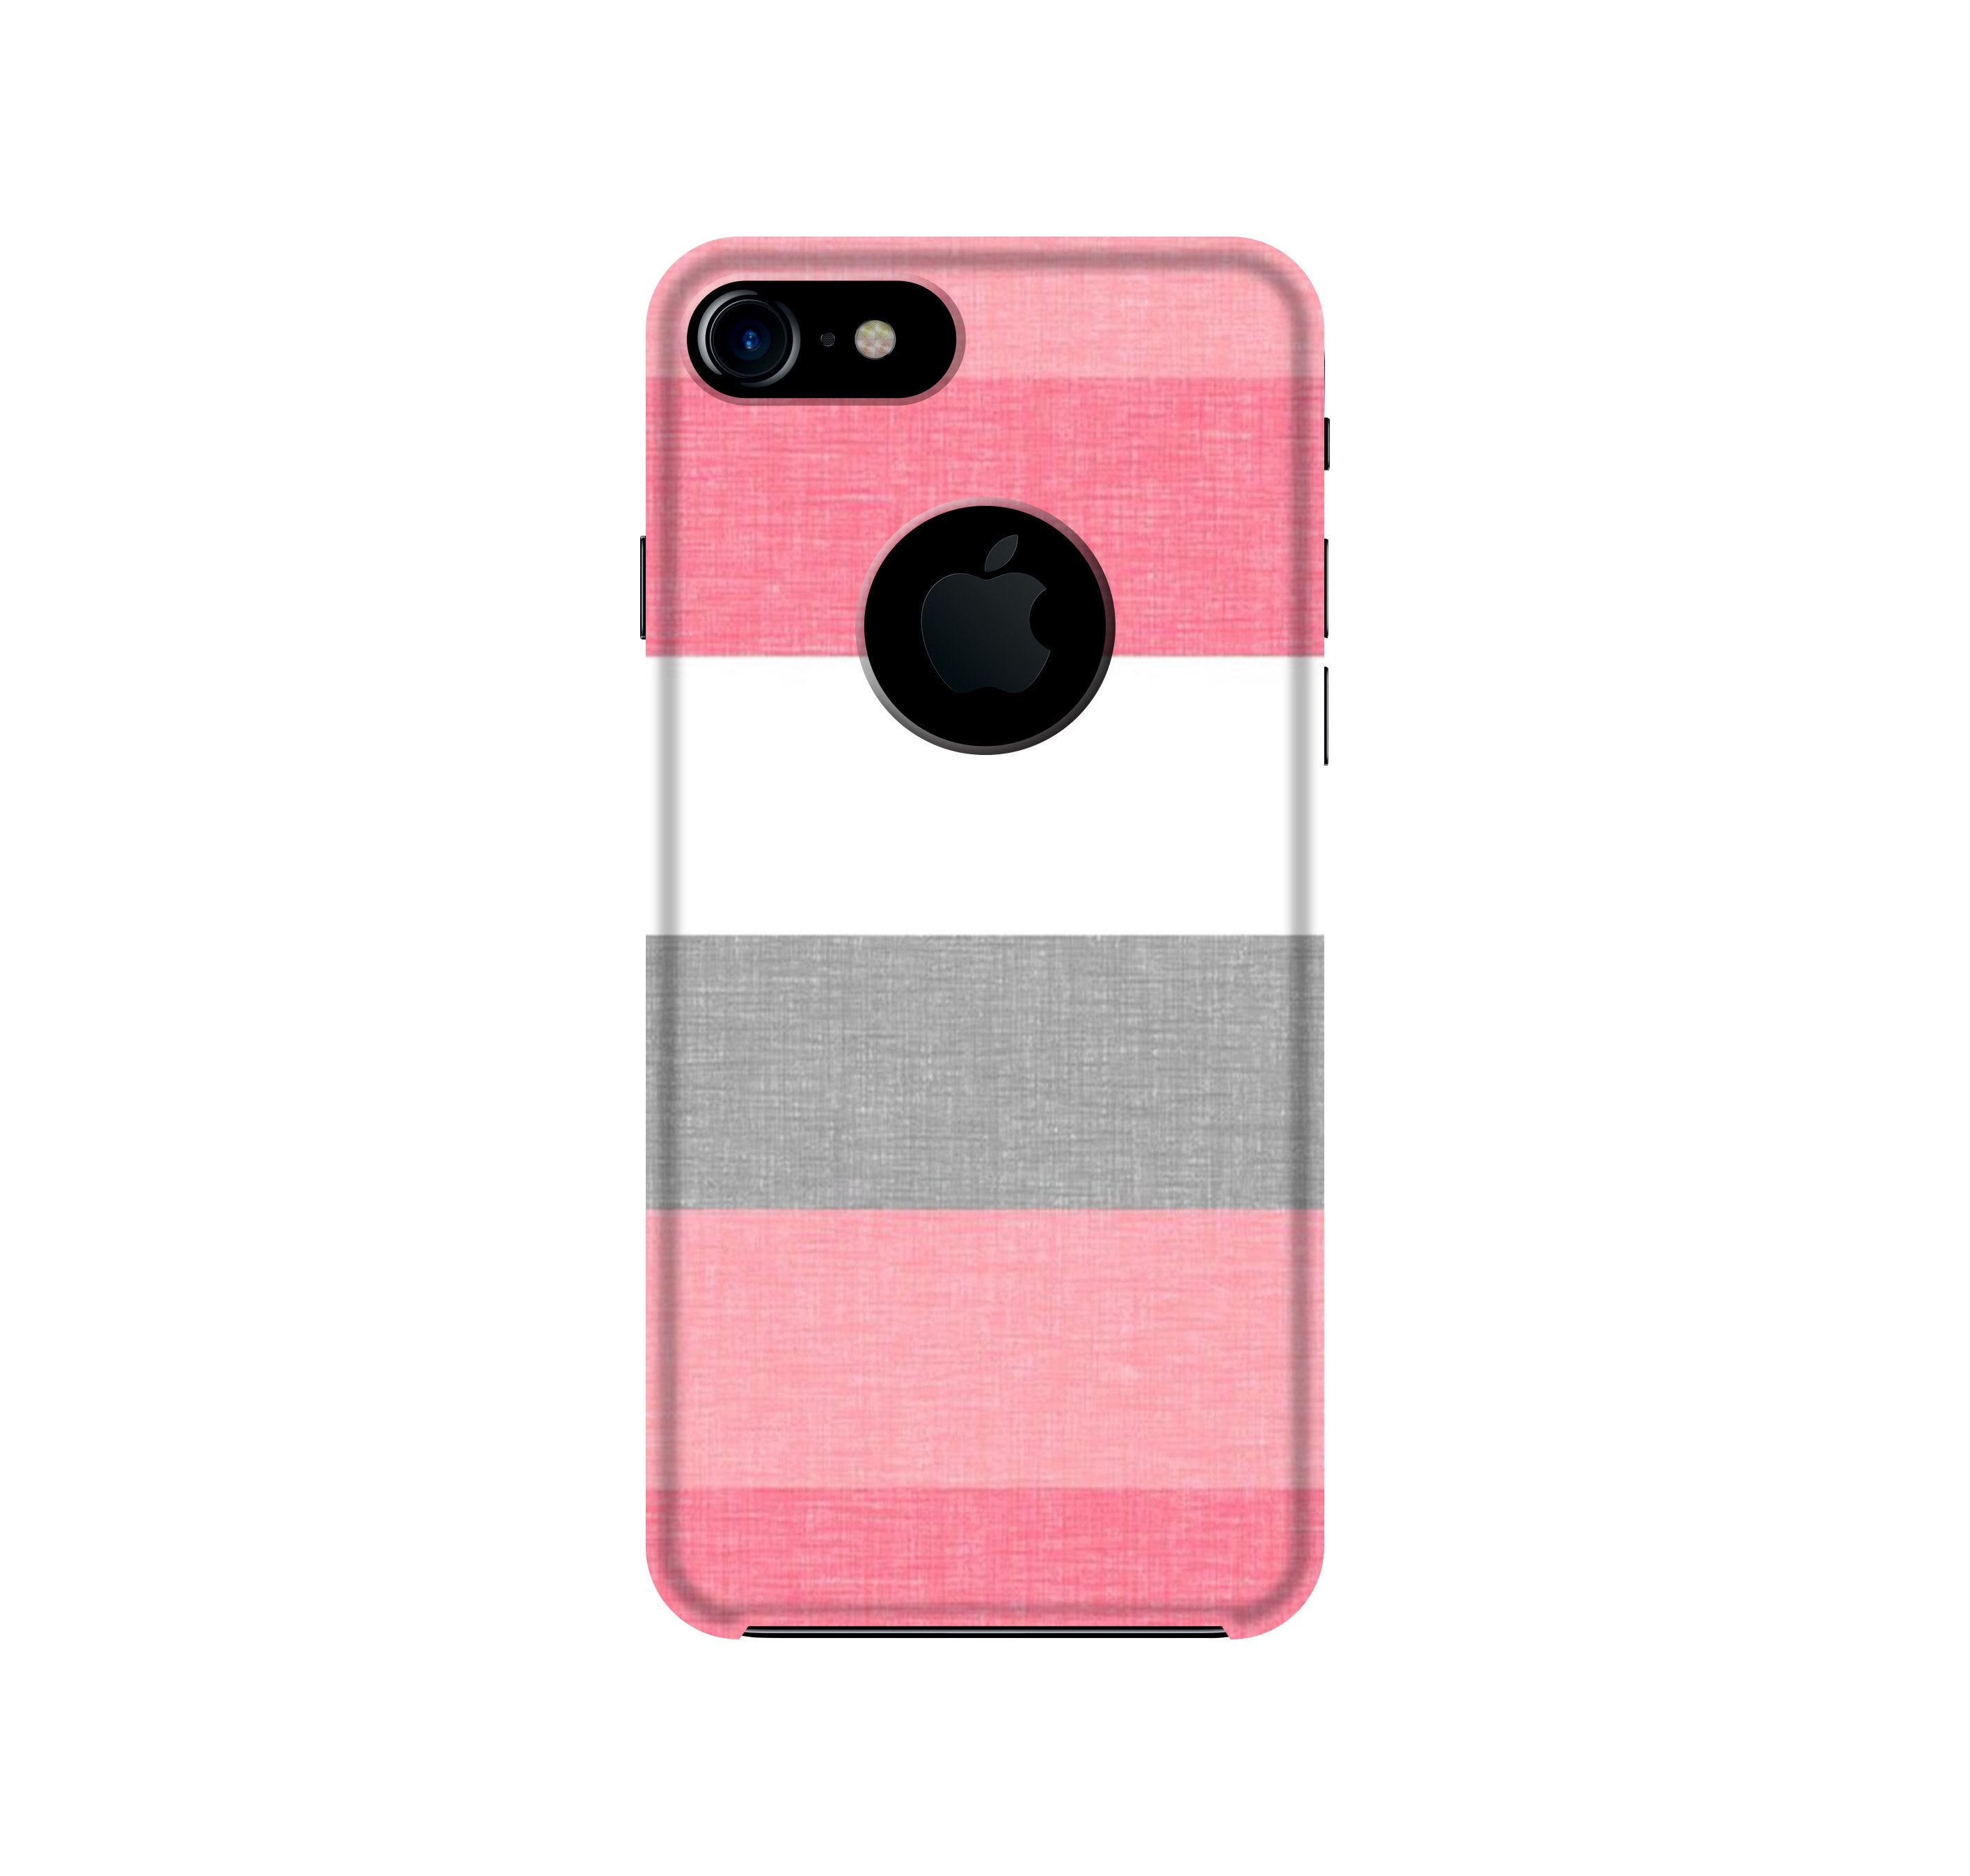 Pink white pattern Case for iPhone 7 logo cut